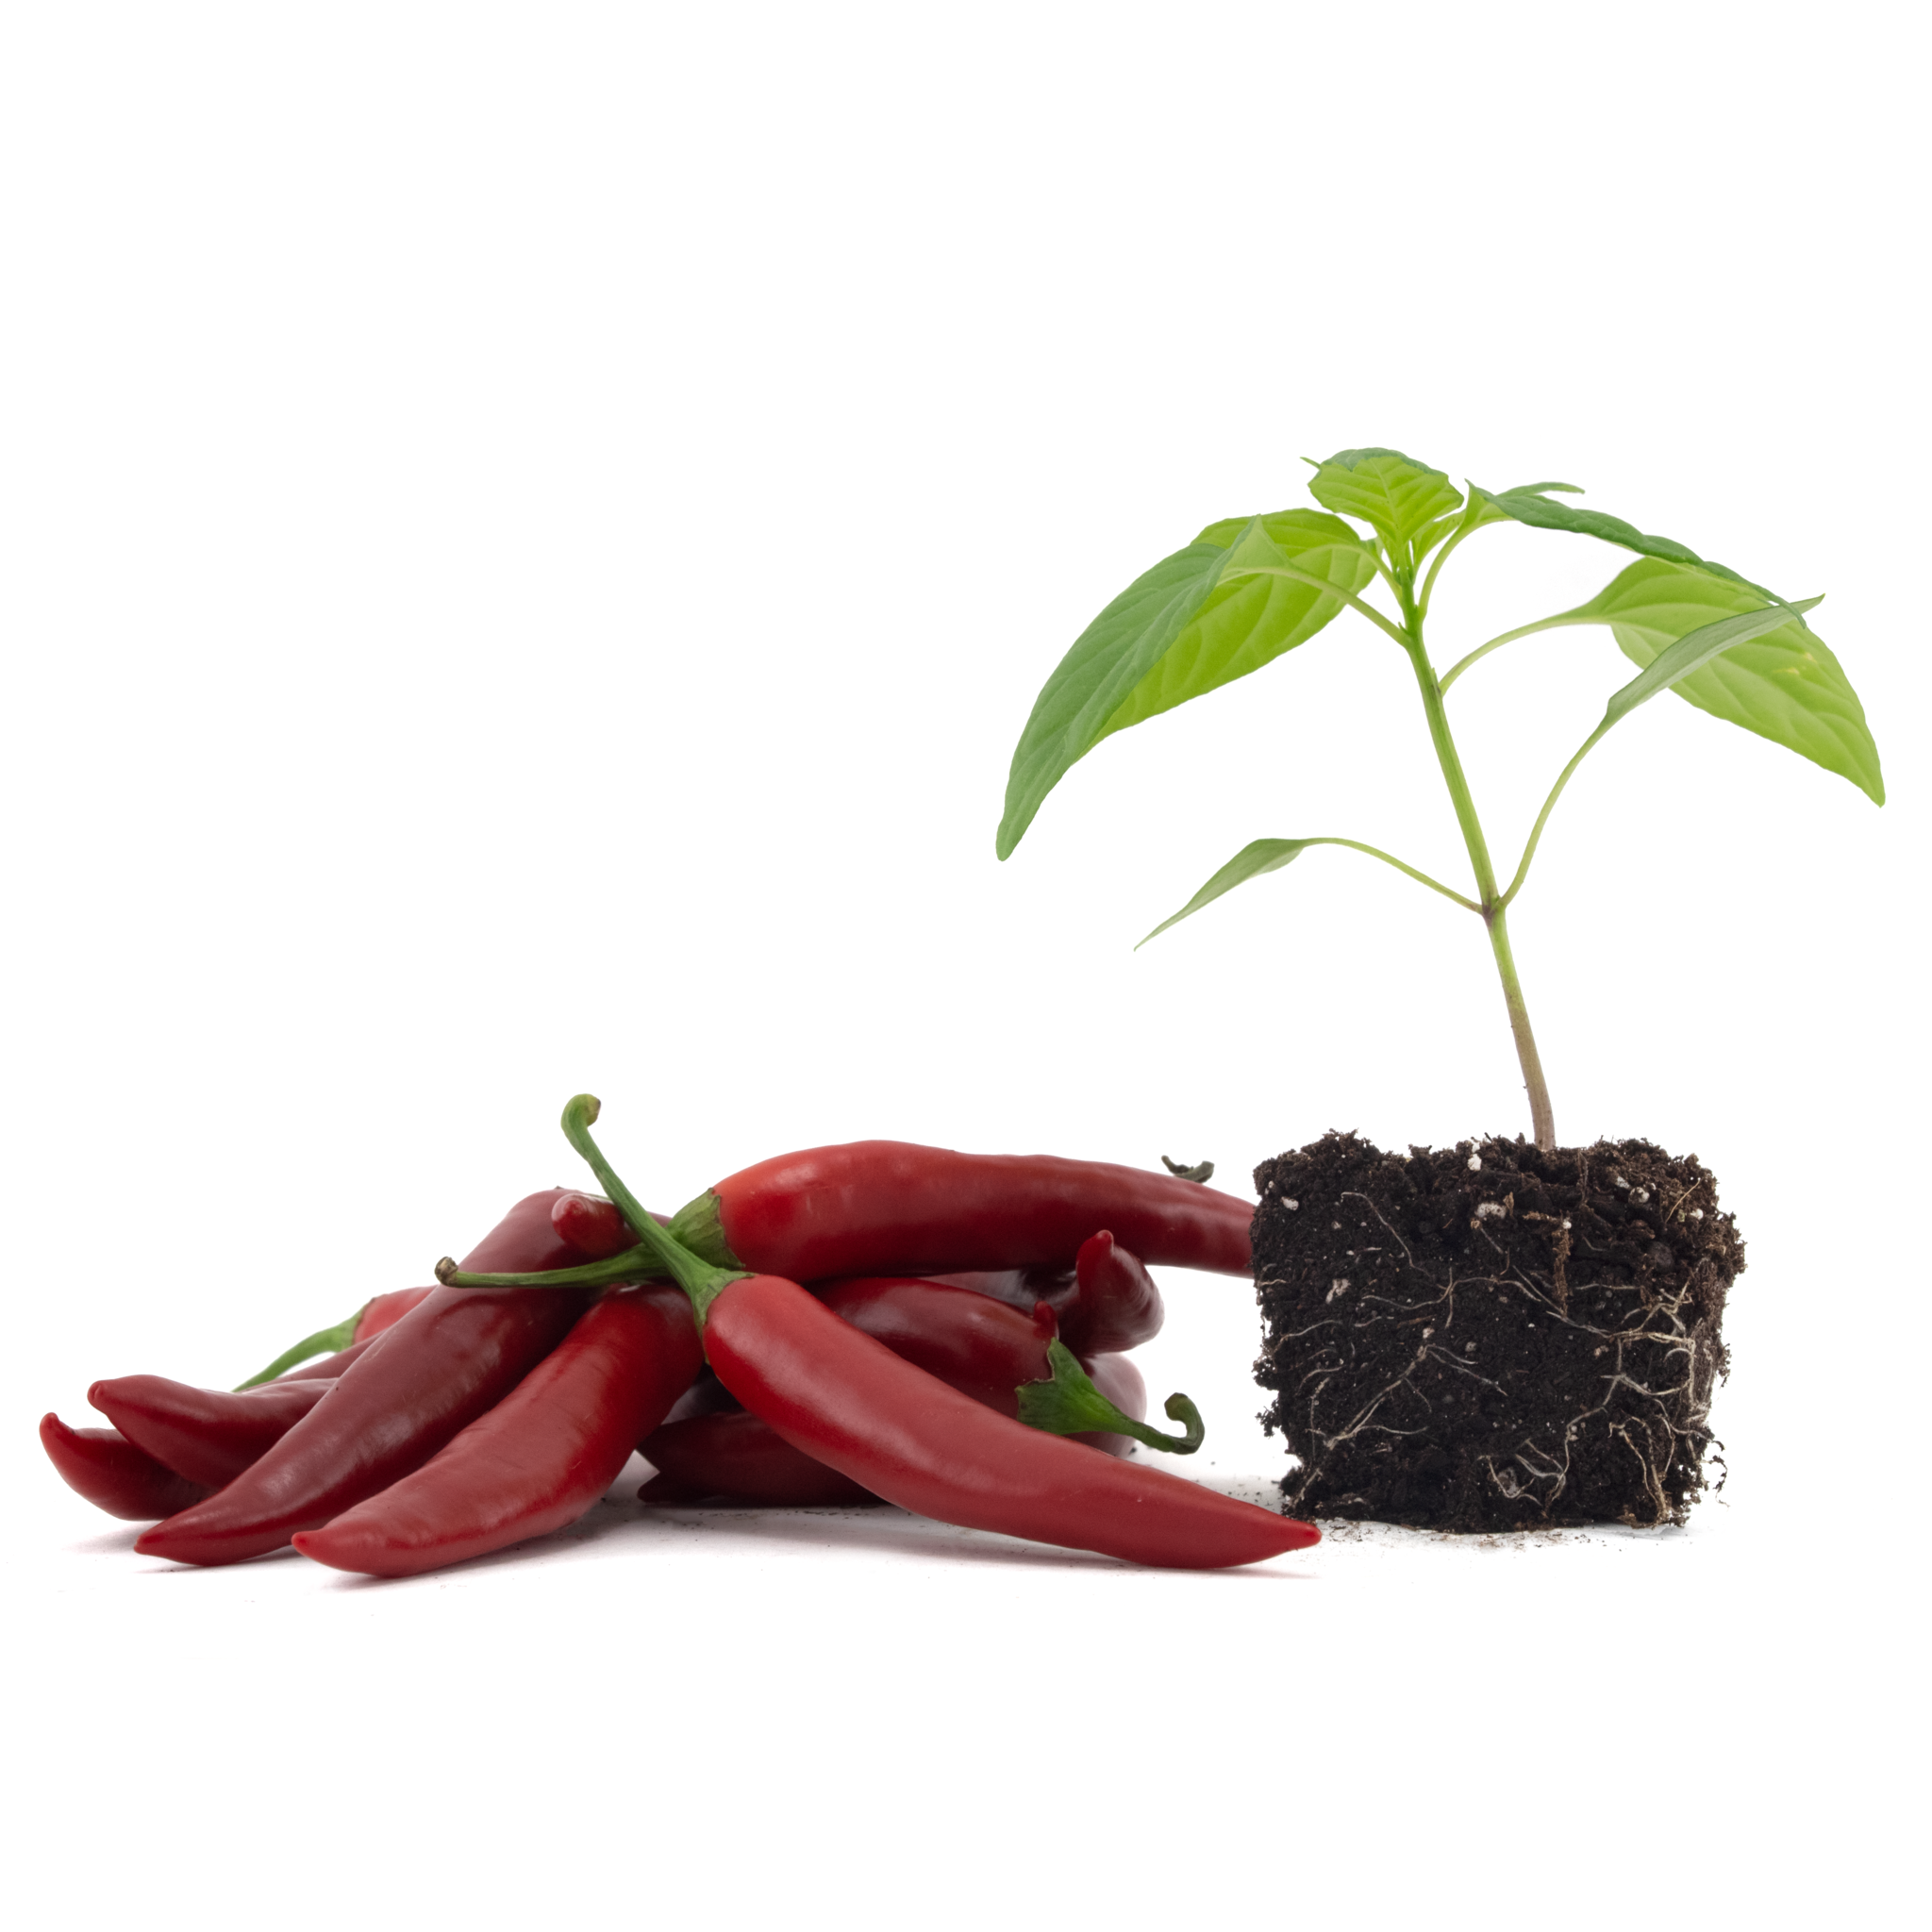 Hot Peppers (Long Red Cayenne)